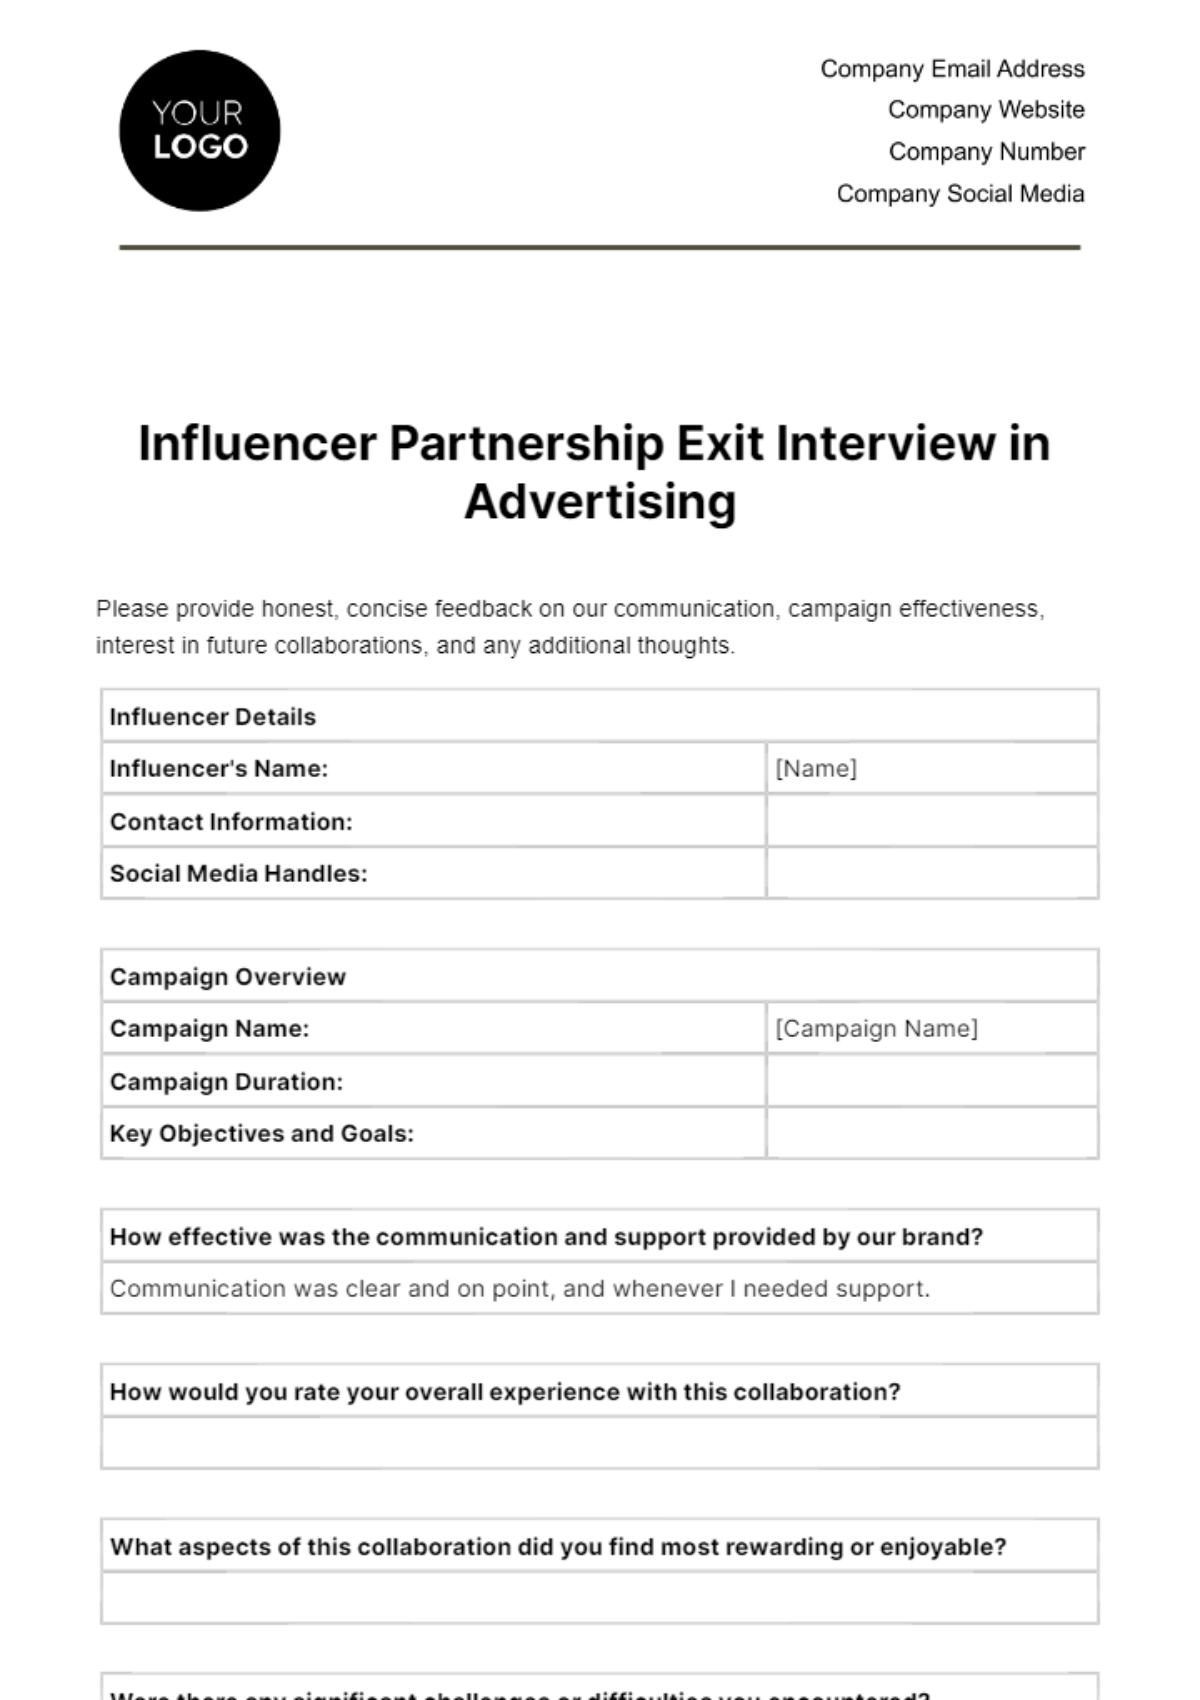 Free Influencer Partnership Exit Interview in Advertising Template